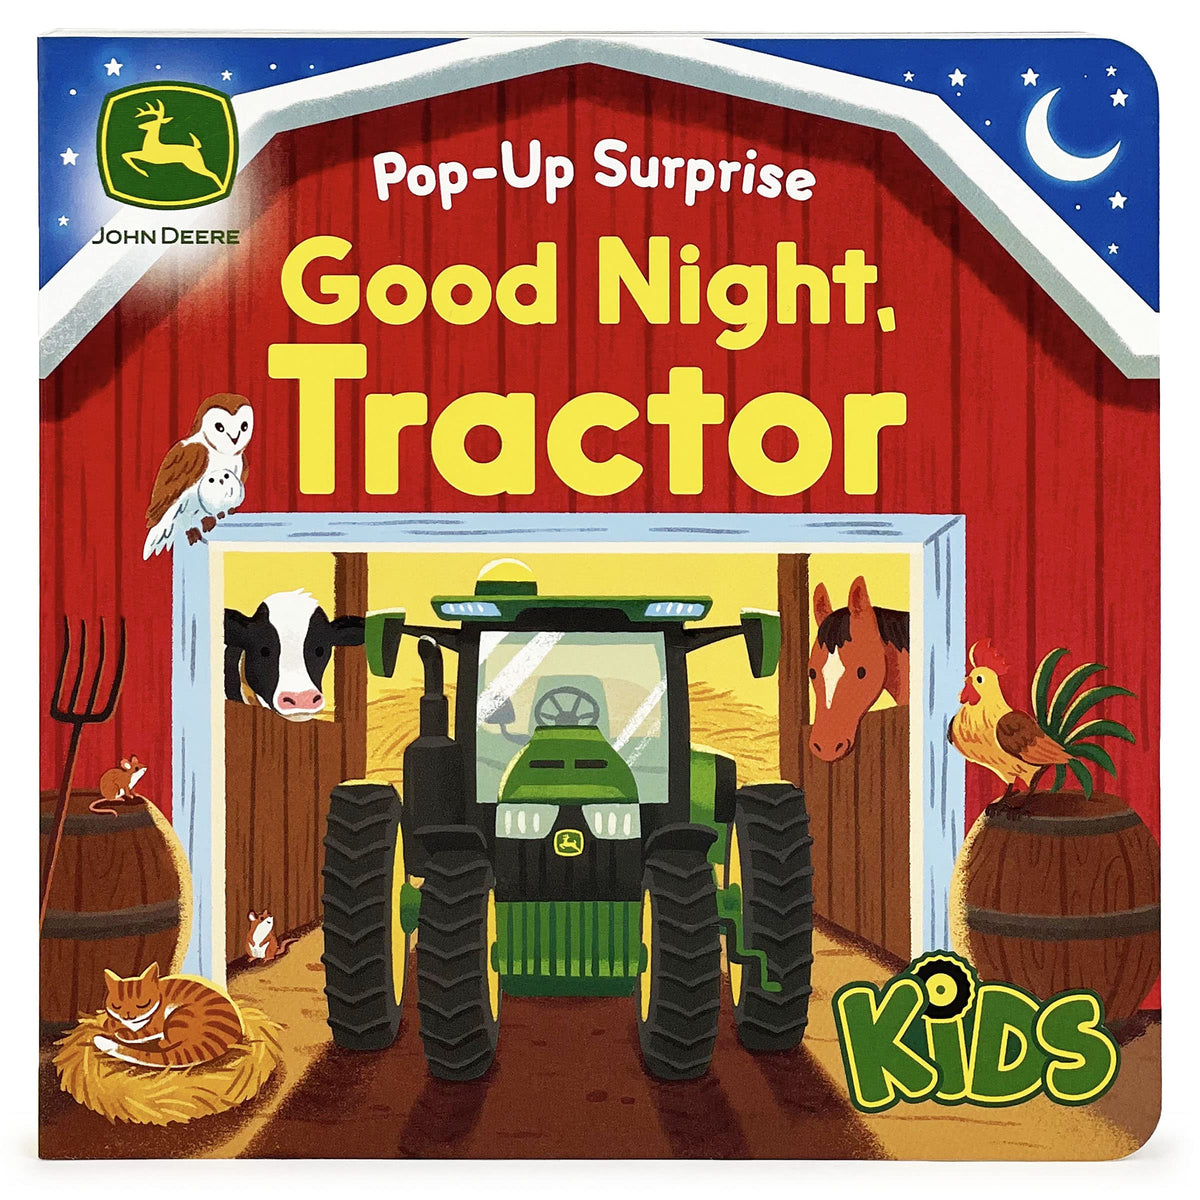 Board　Up　Pop　Night　–　Good　Surprise　Book　Tractor　Olly-Olly